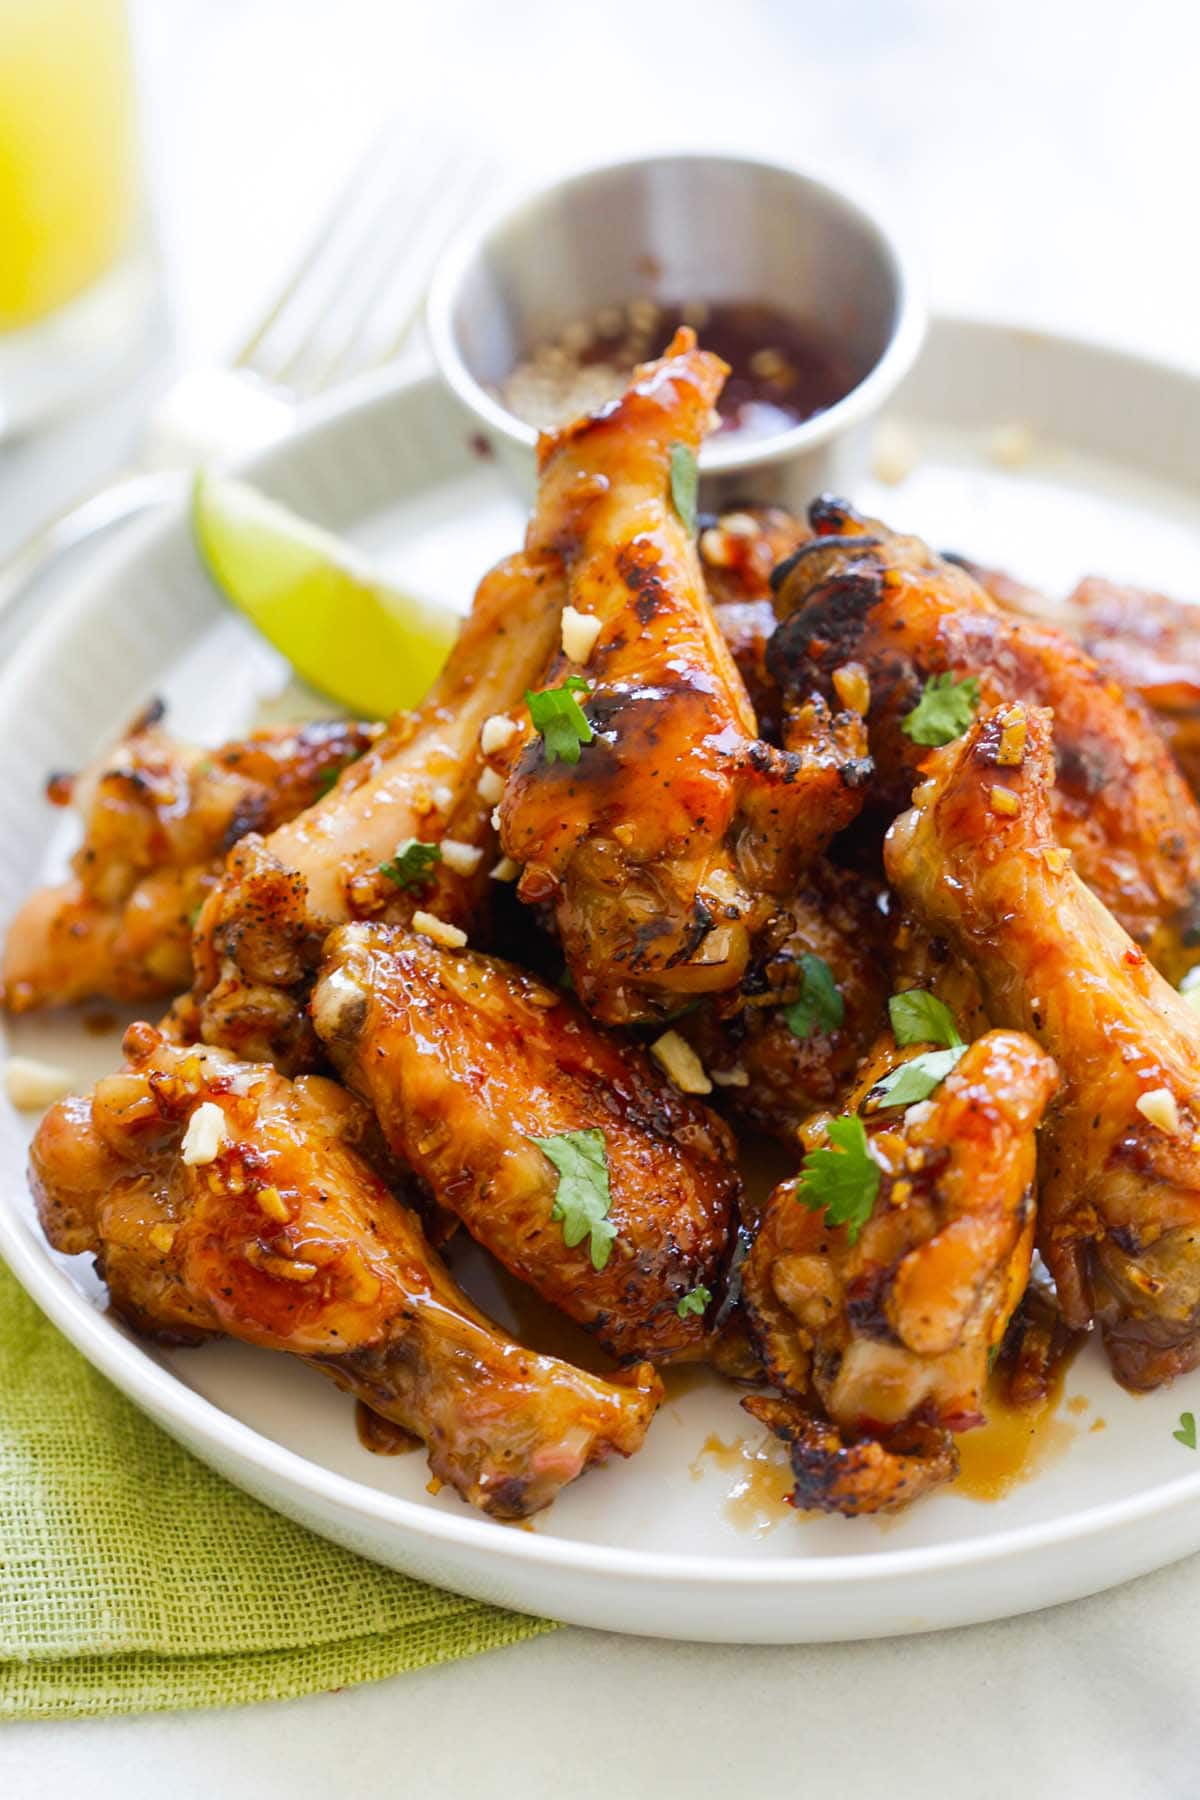 Easy homemade chicken wings dipped into chicken wings dipping sauce.